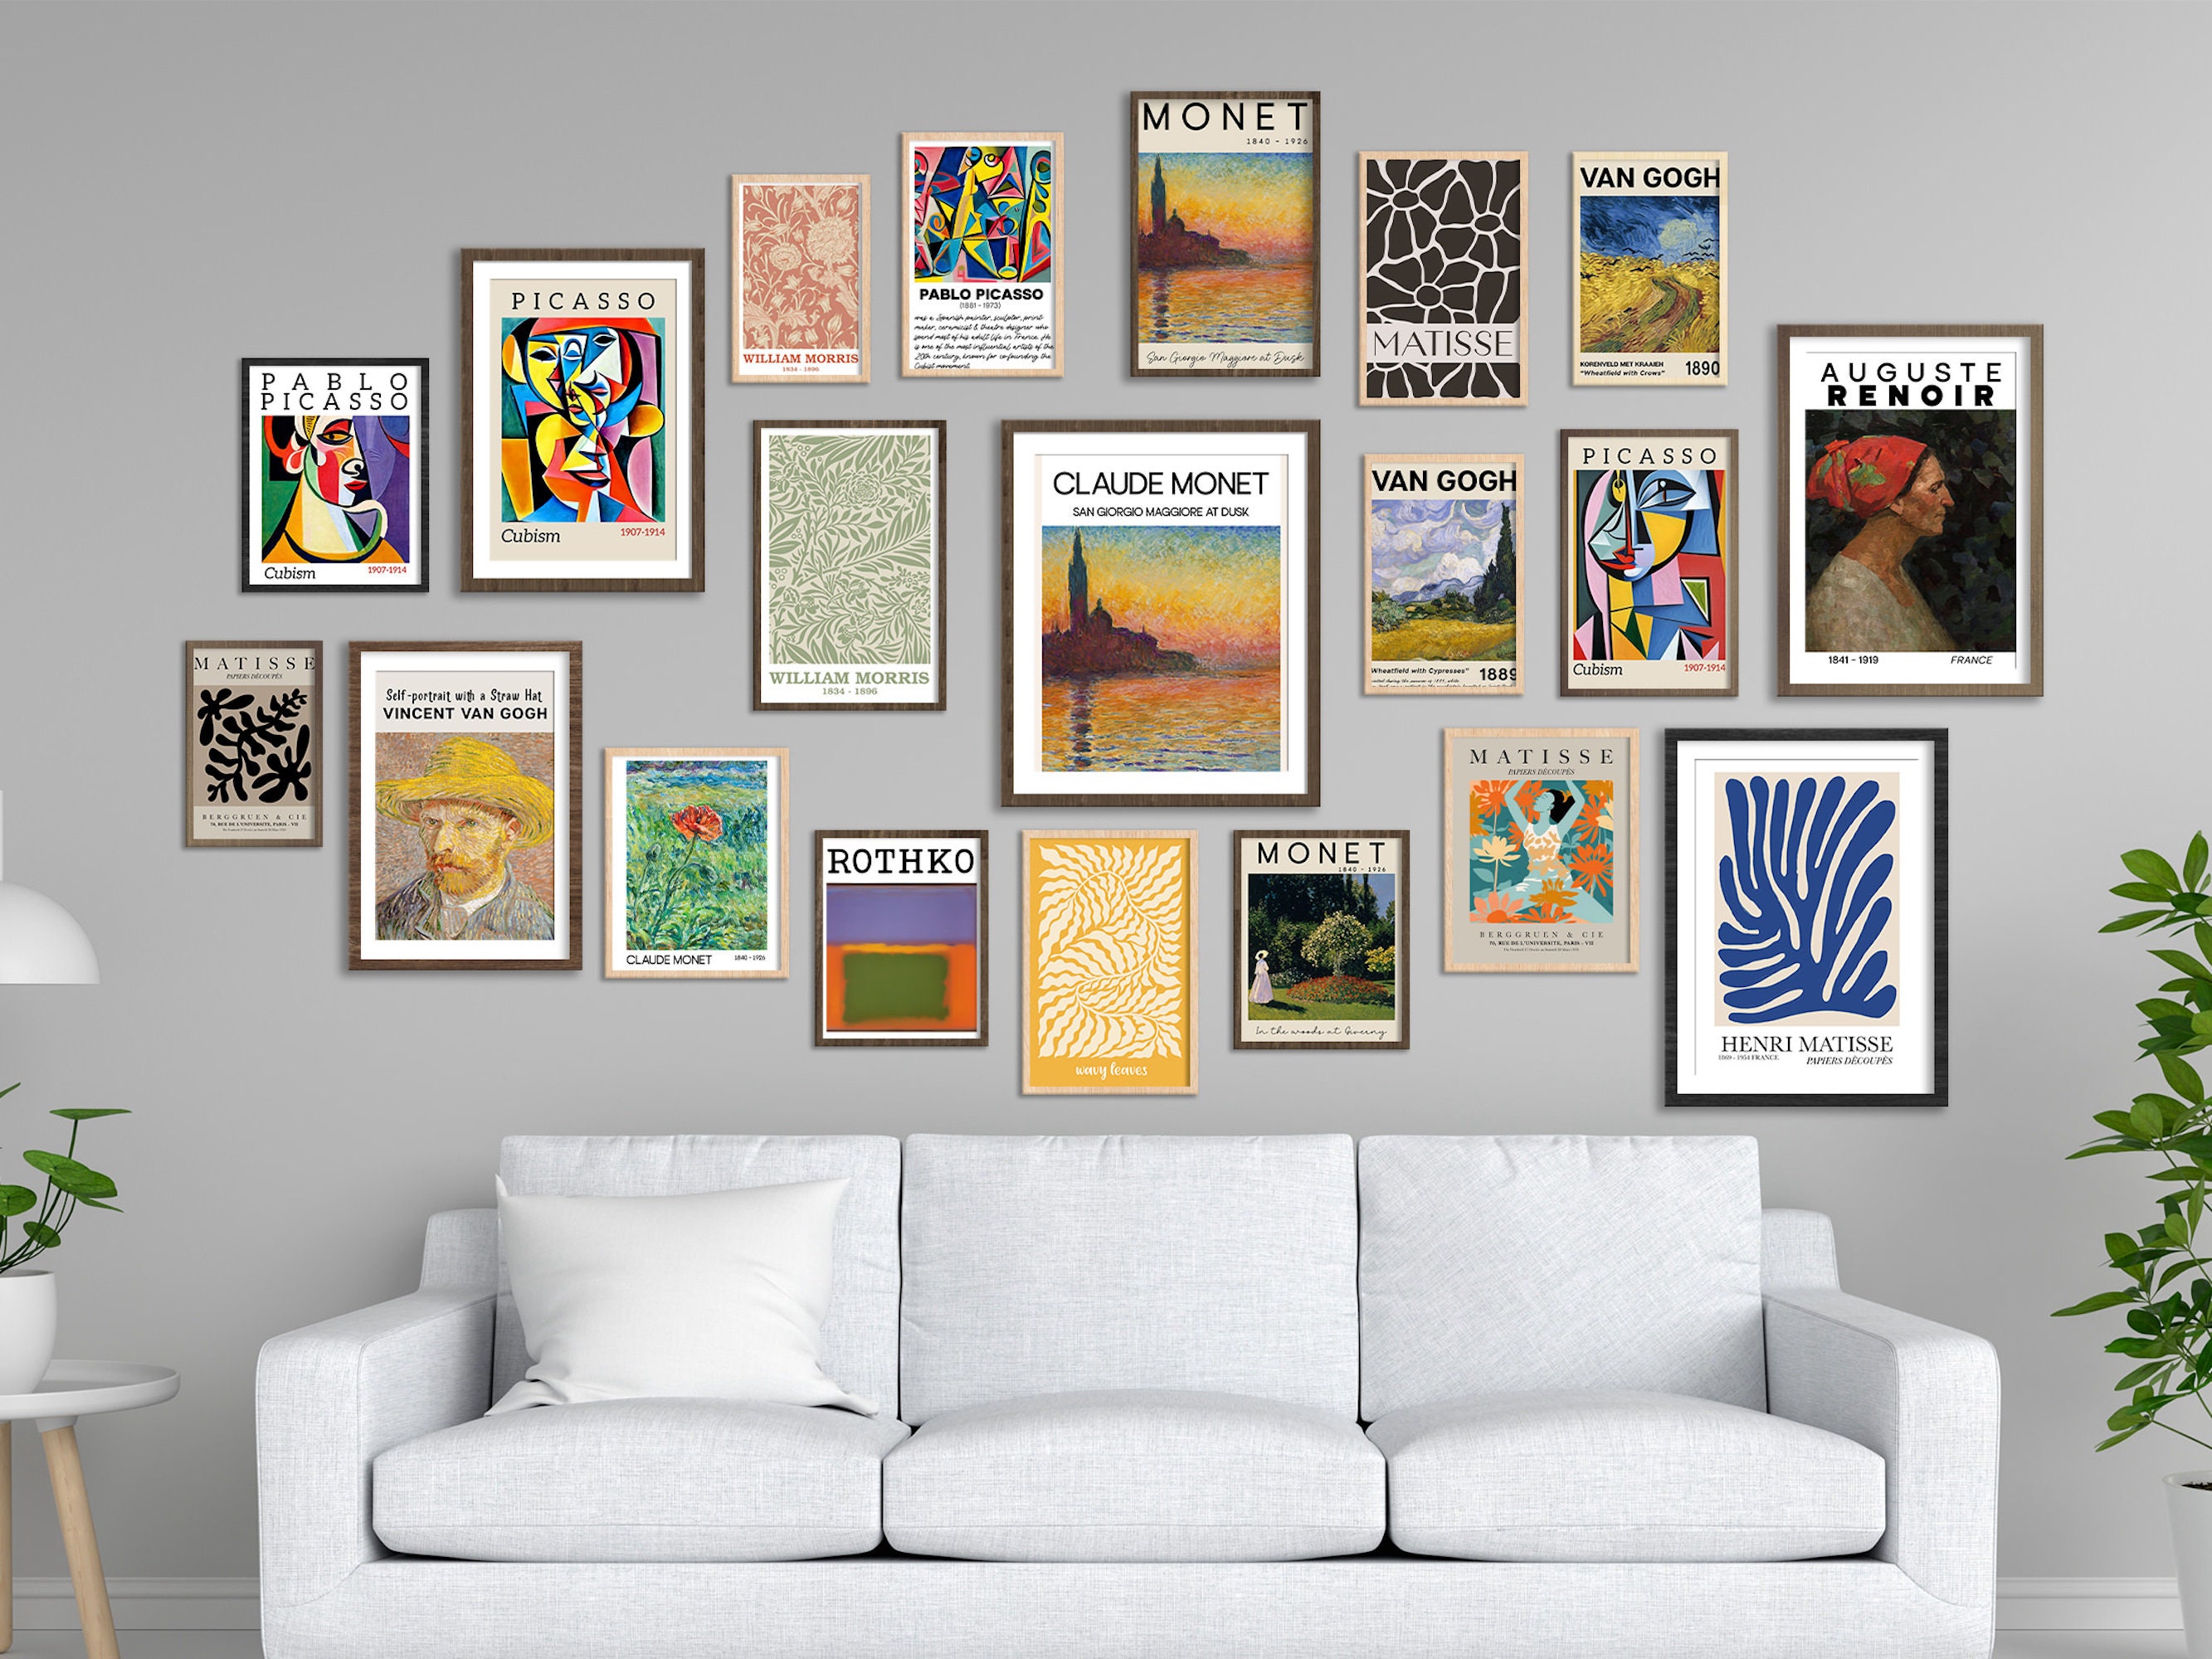 Printable Wall Wall Gallery Etsy Wall BUNDLE 375 Wall Art Maximalist Decor, Eclectic Gallery Eclectic Set MEGA Home Prints, Collage, Art, - Airbnb